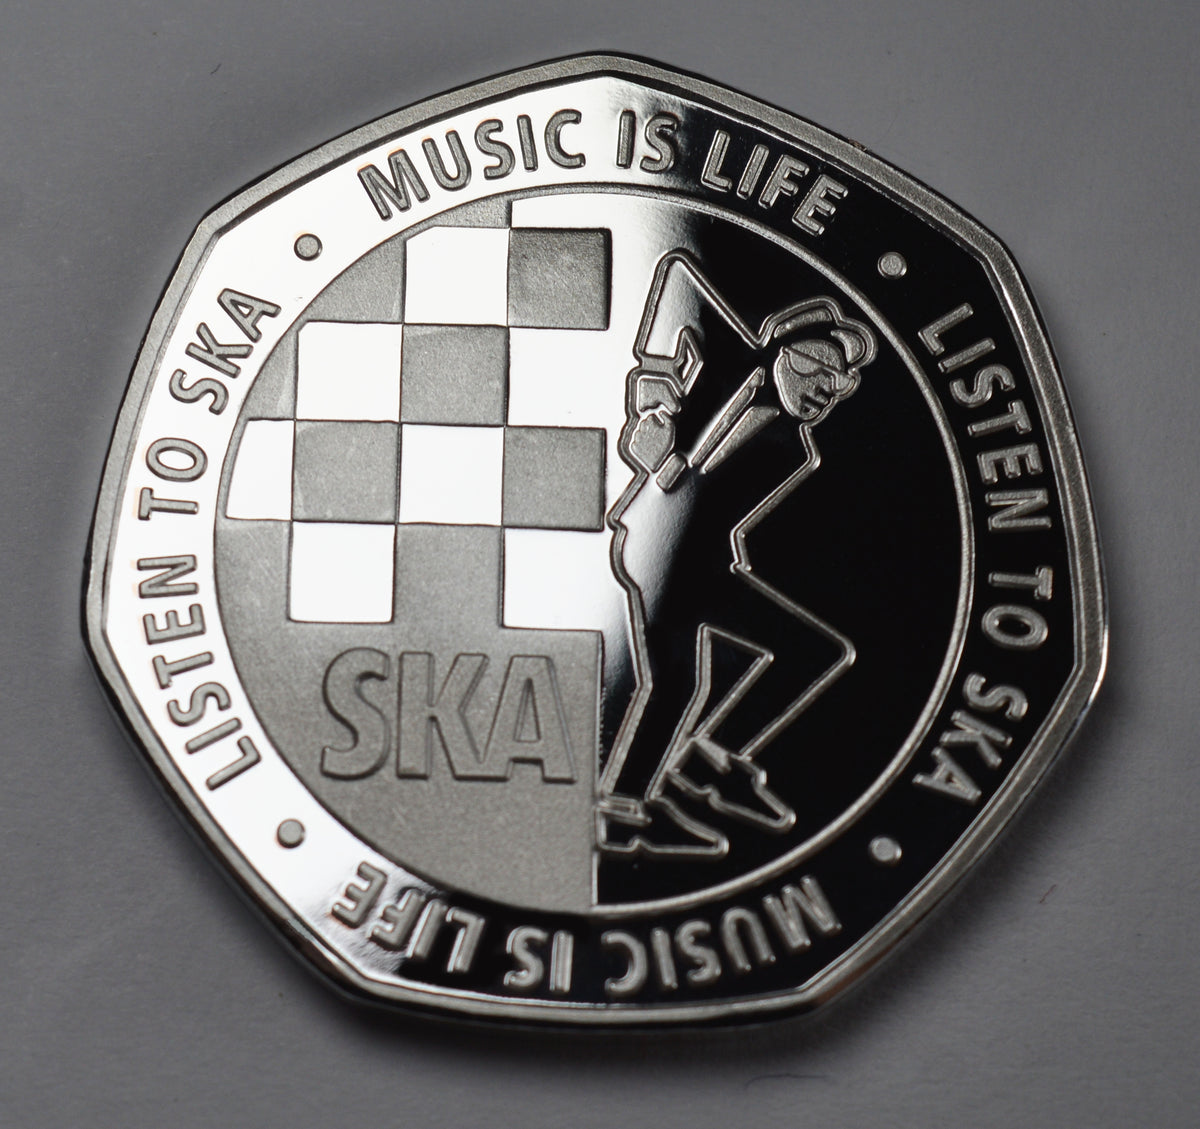 SKA 'MUSIC IS LIFE' - Silver – The Commemorative Coin Company